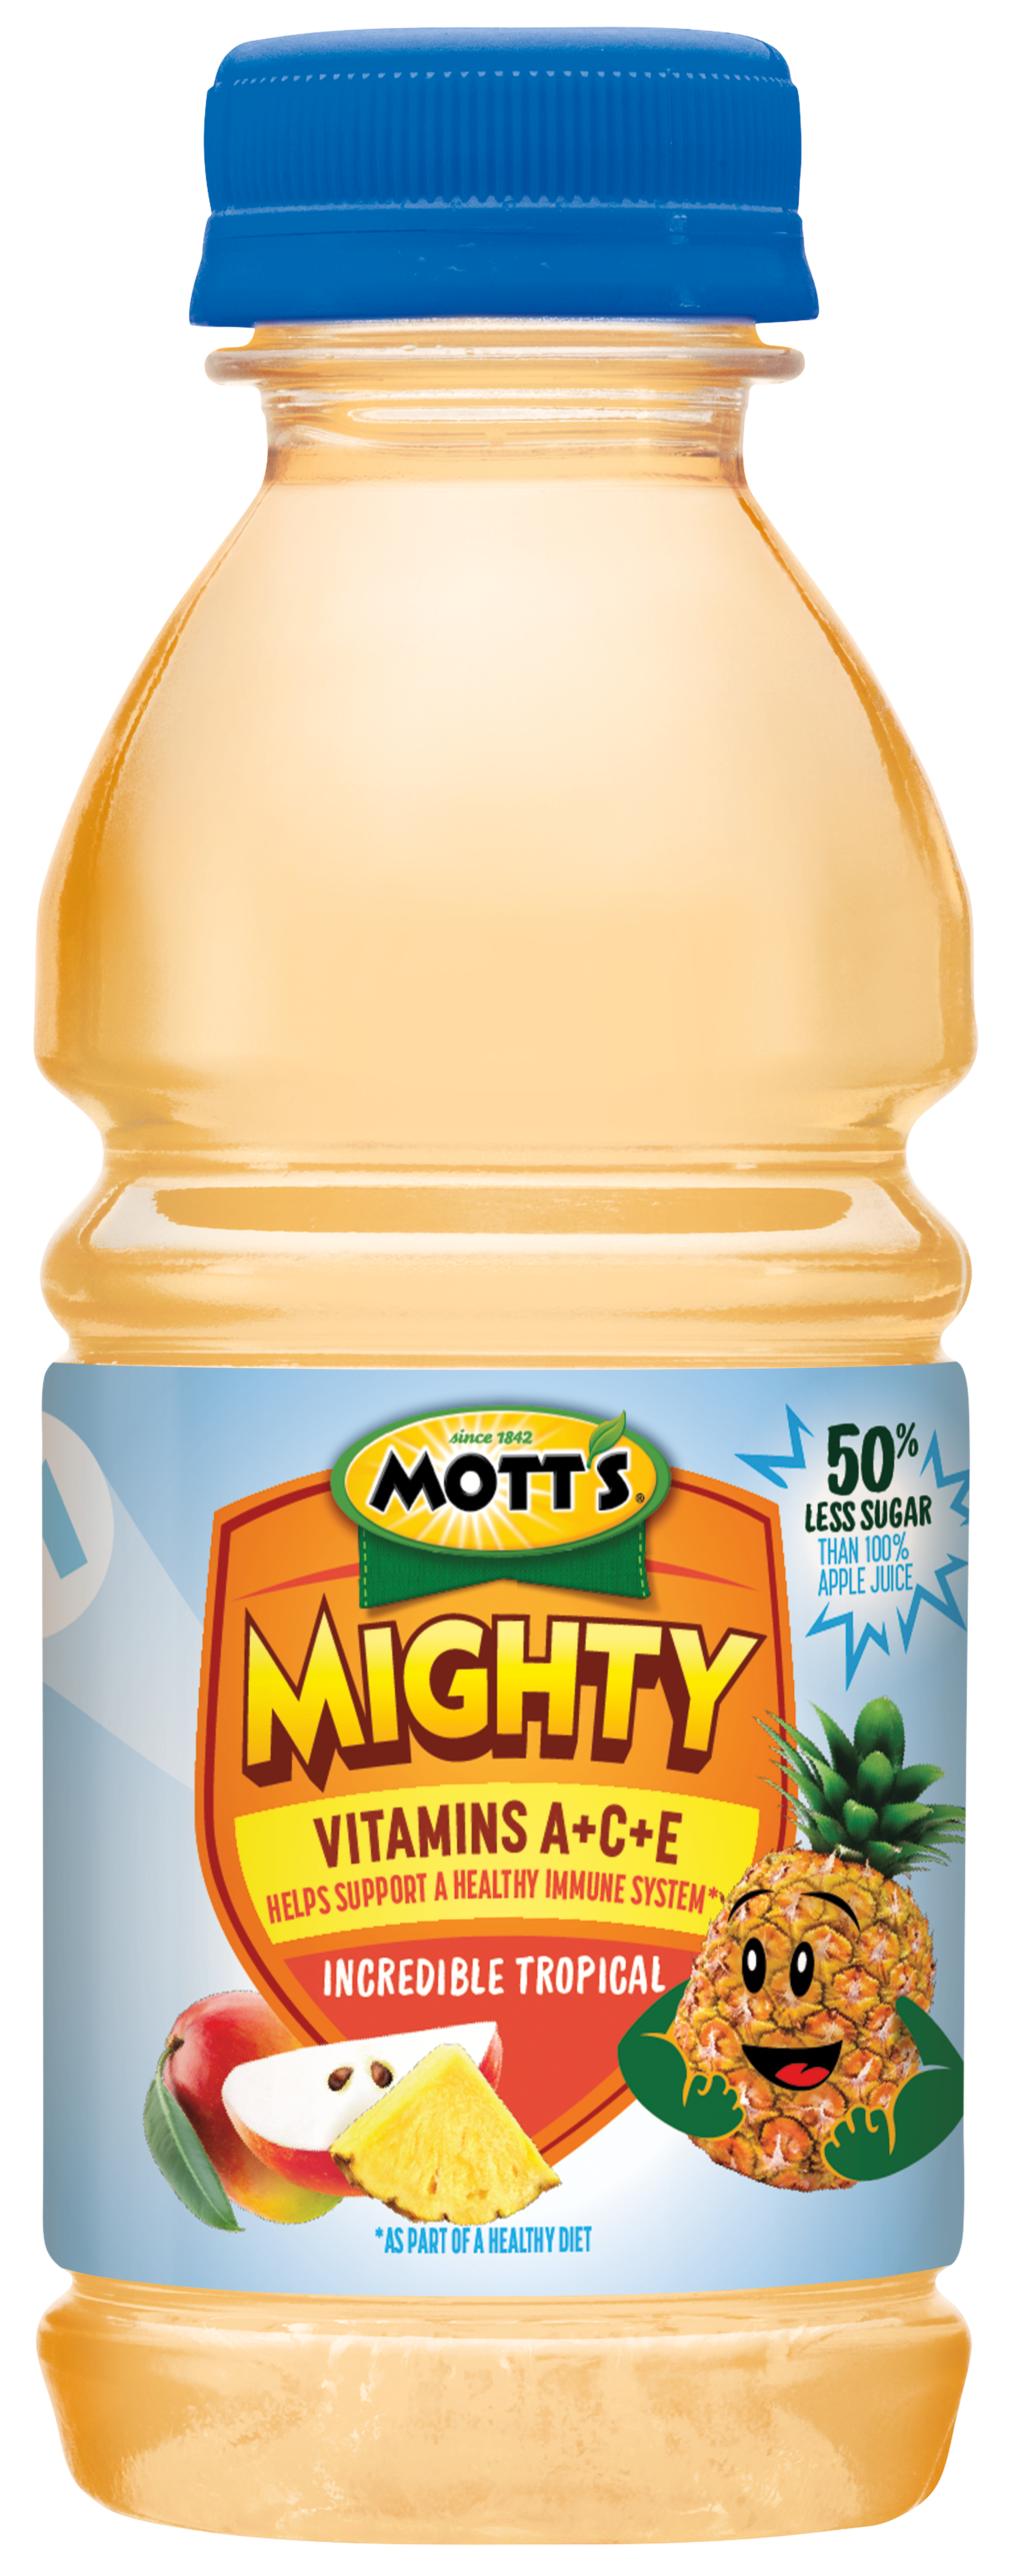 Mott's Mighty Incredible Tropical